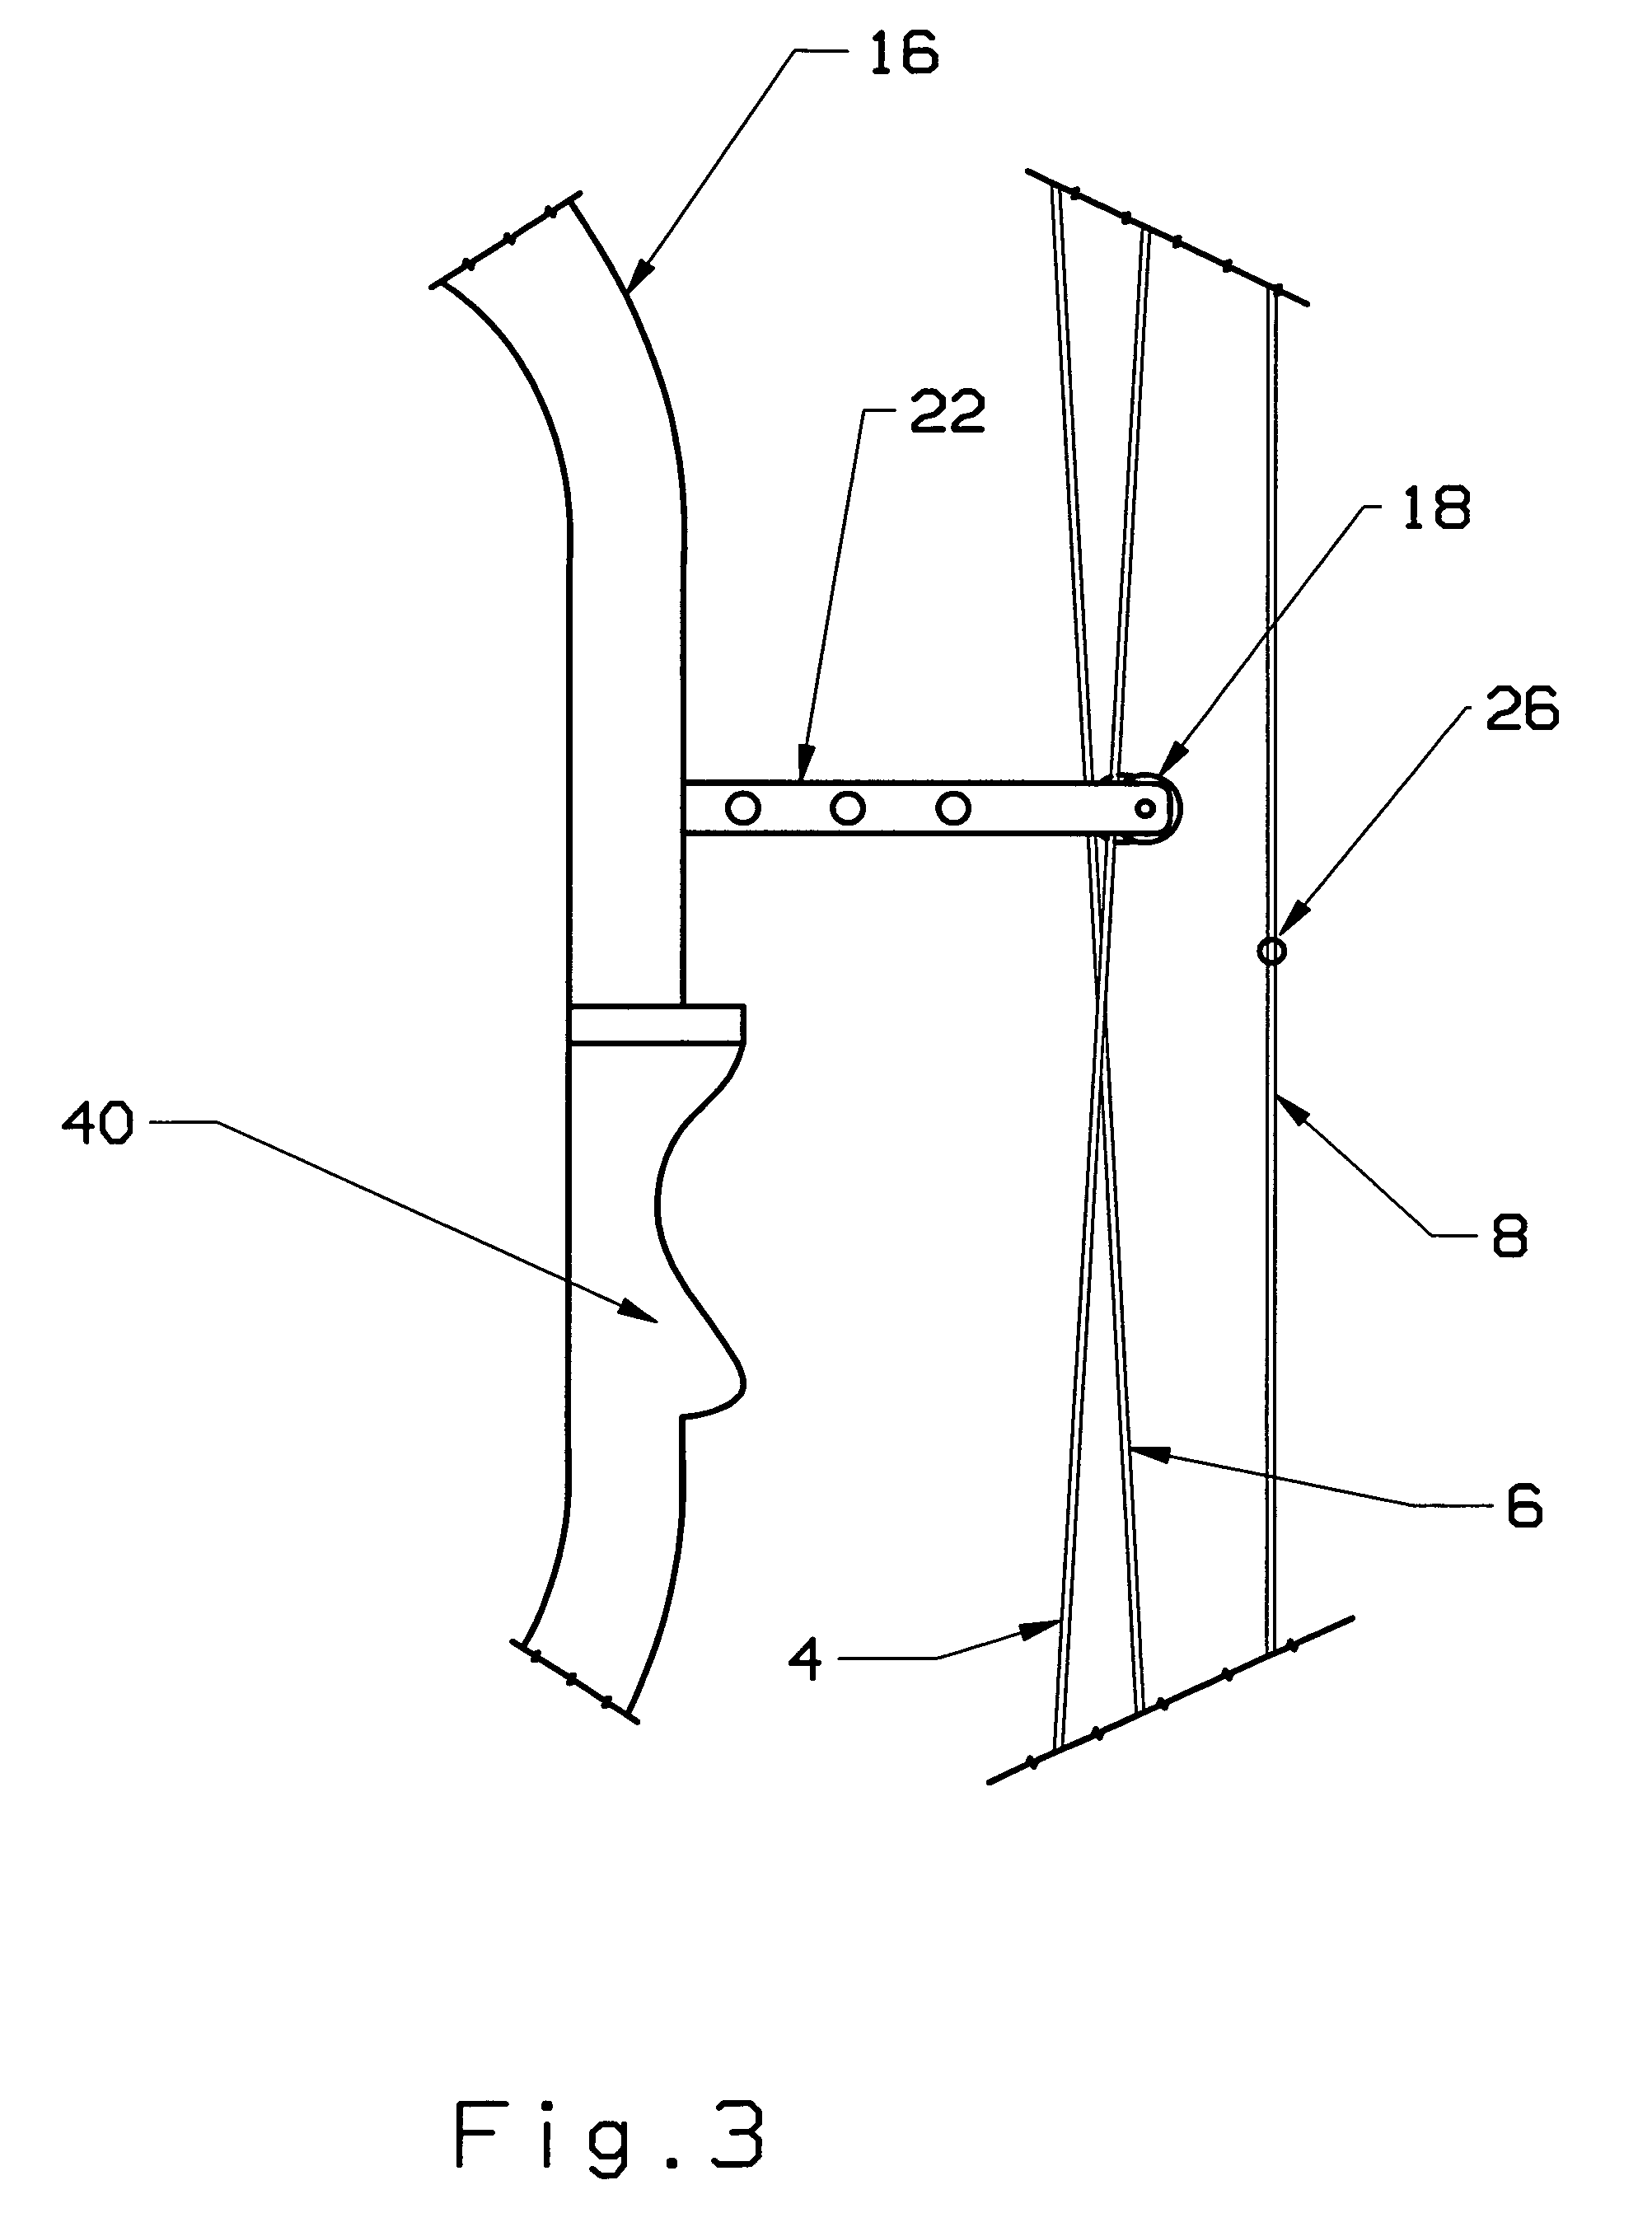 Method and apparatus for optimal nock travel for a compound archery bow